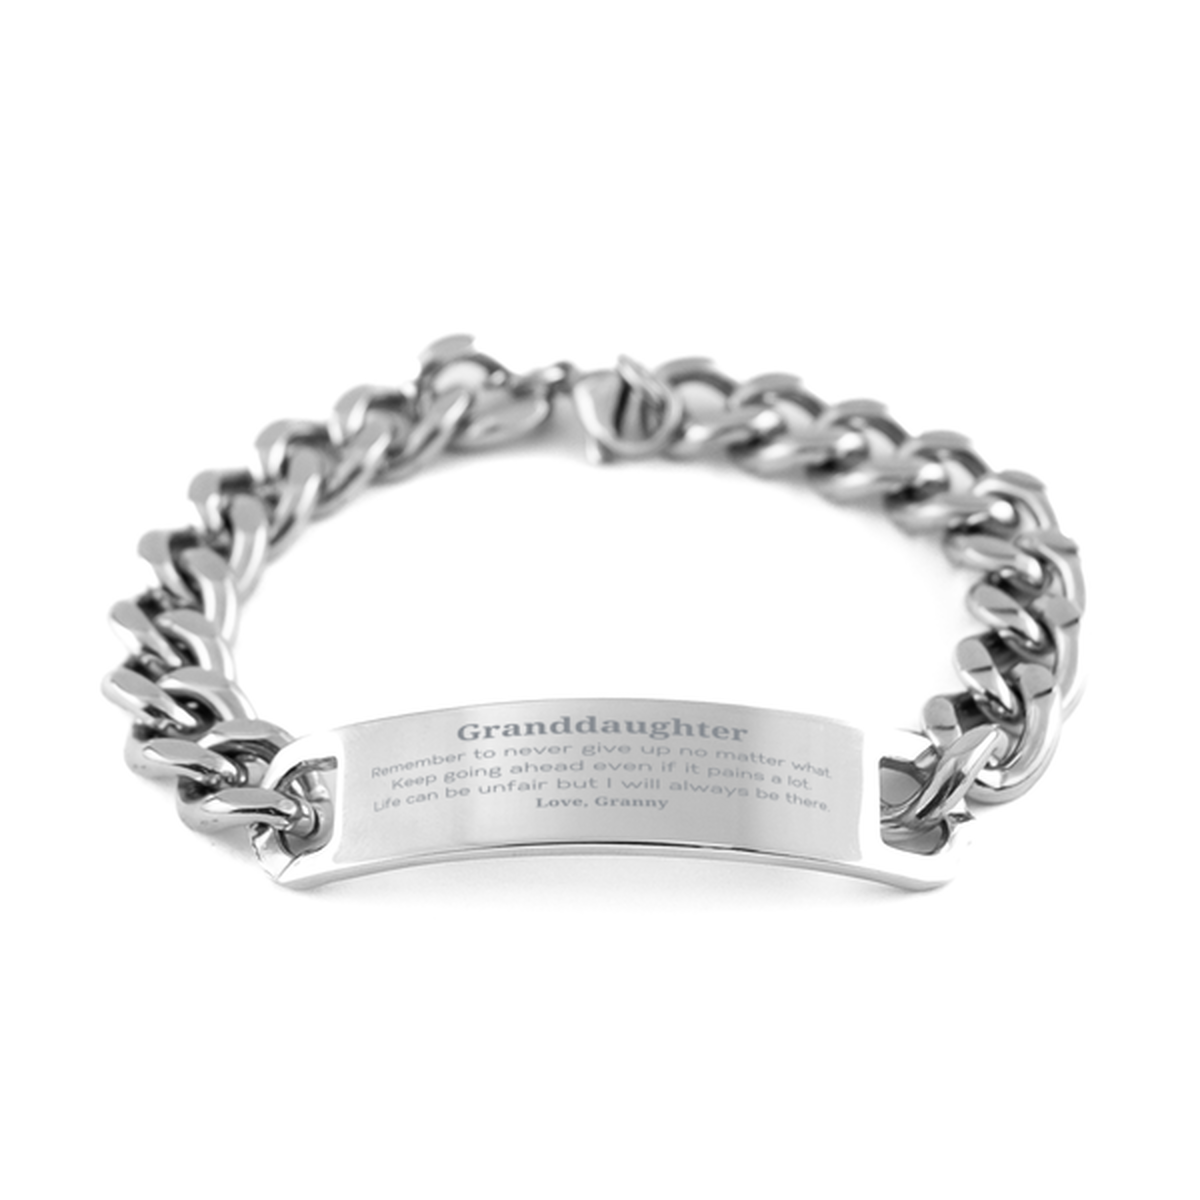 Granddaughter Motivational Gifts from Granny, Remember to never give up no matter what, Inspirational Birthday Cuban Chain Stainless Steel Bracelet for Granddaughter